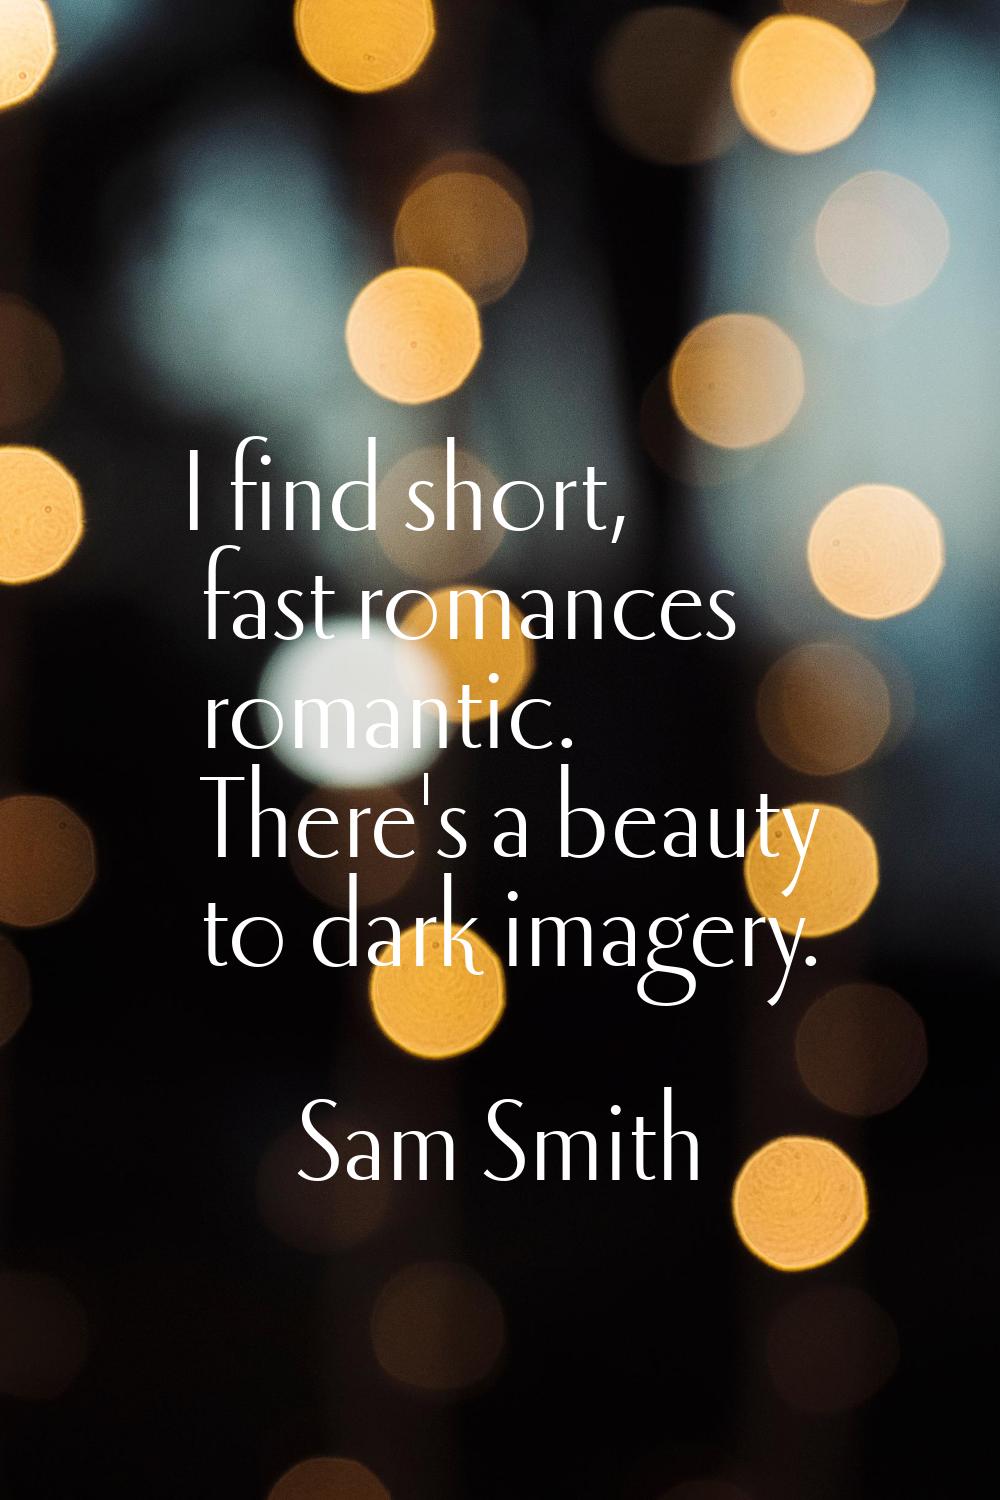 I find short, fast romances romantic. There's a beauty to dark imagery.